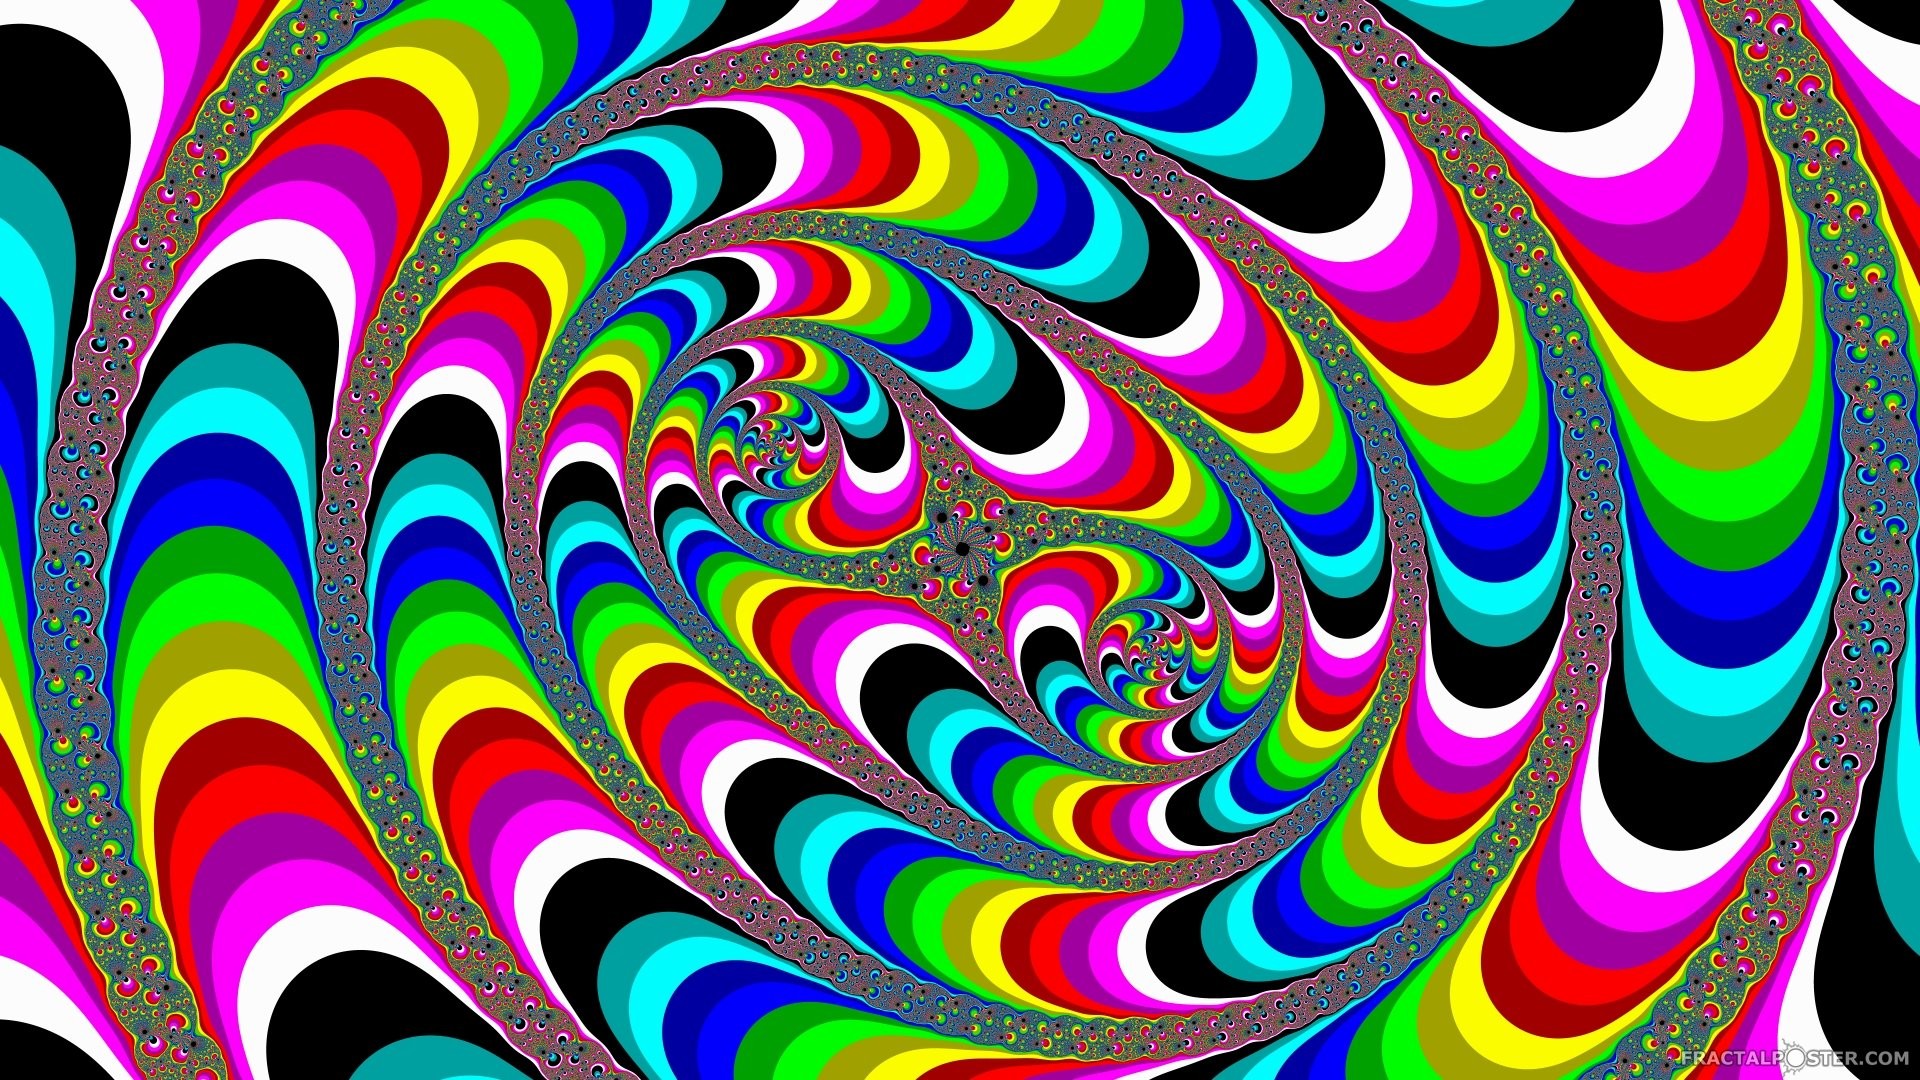 1920x1080 538 Psychedelic HD Wallpapers | Backgrounds - Wallpaper Abyss ...